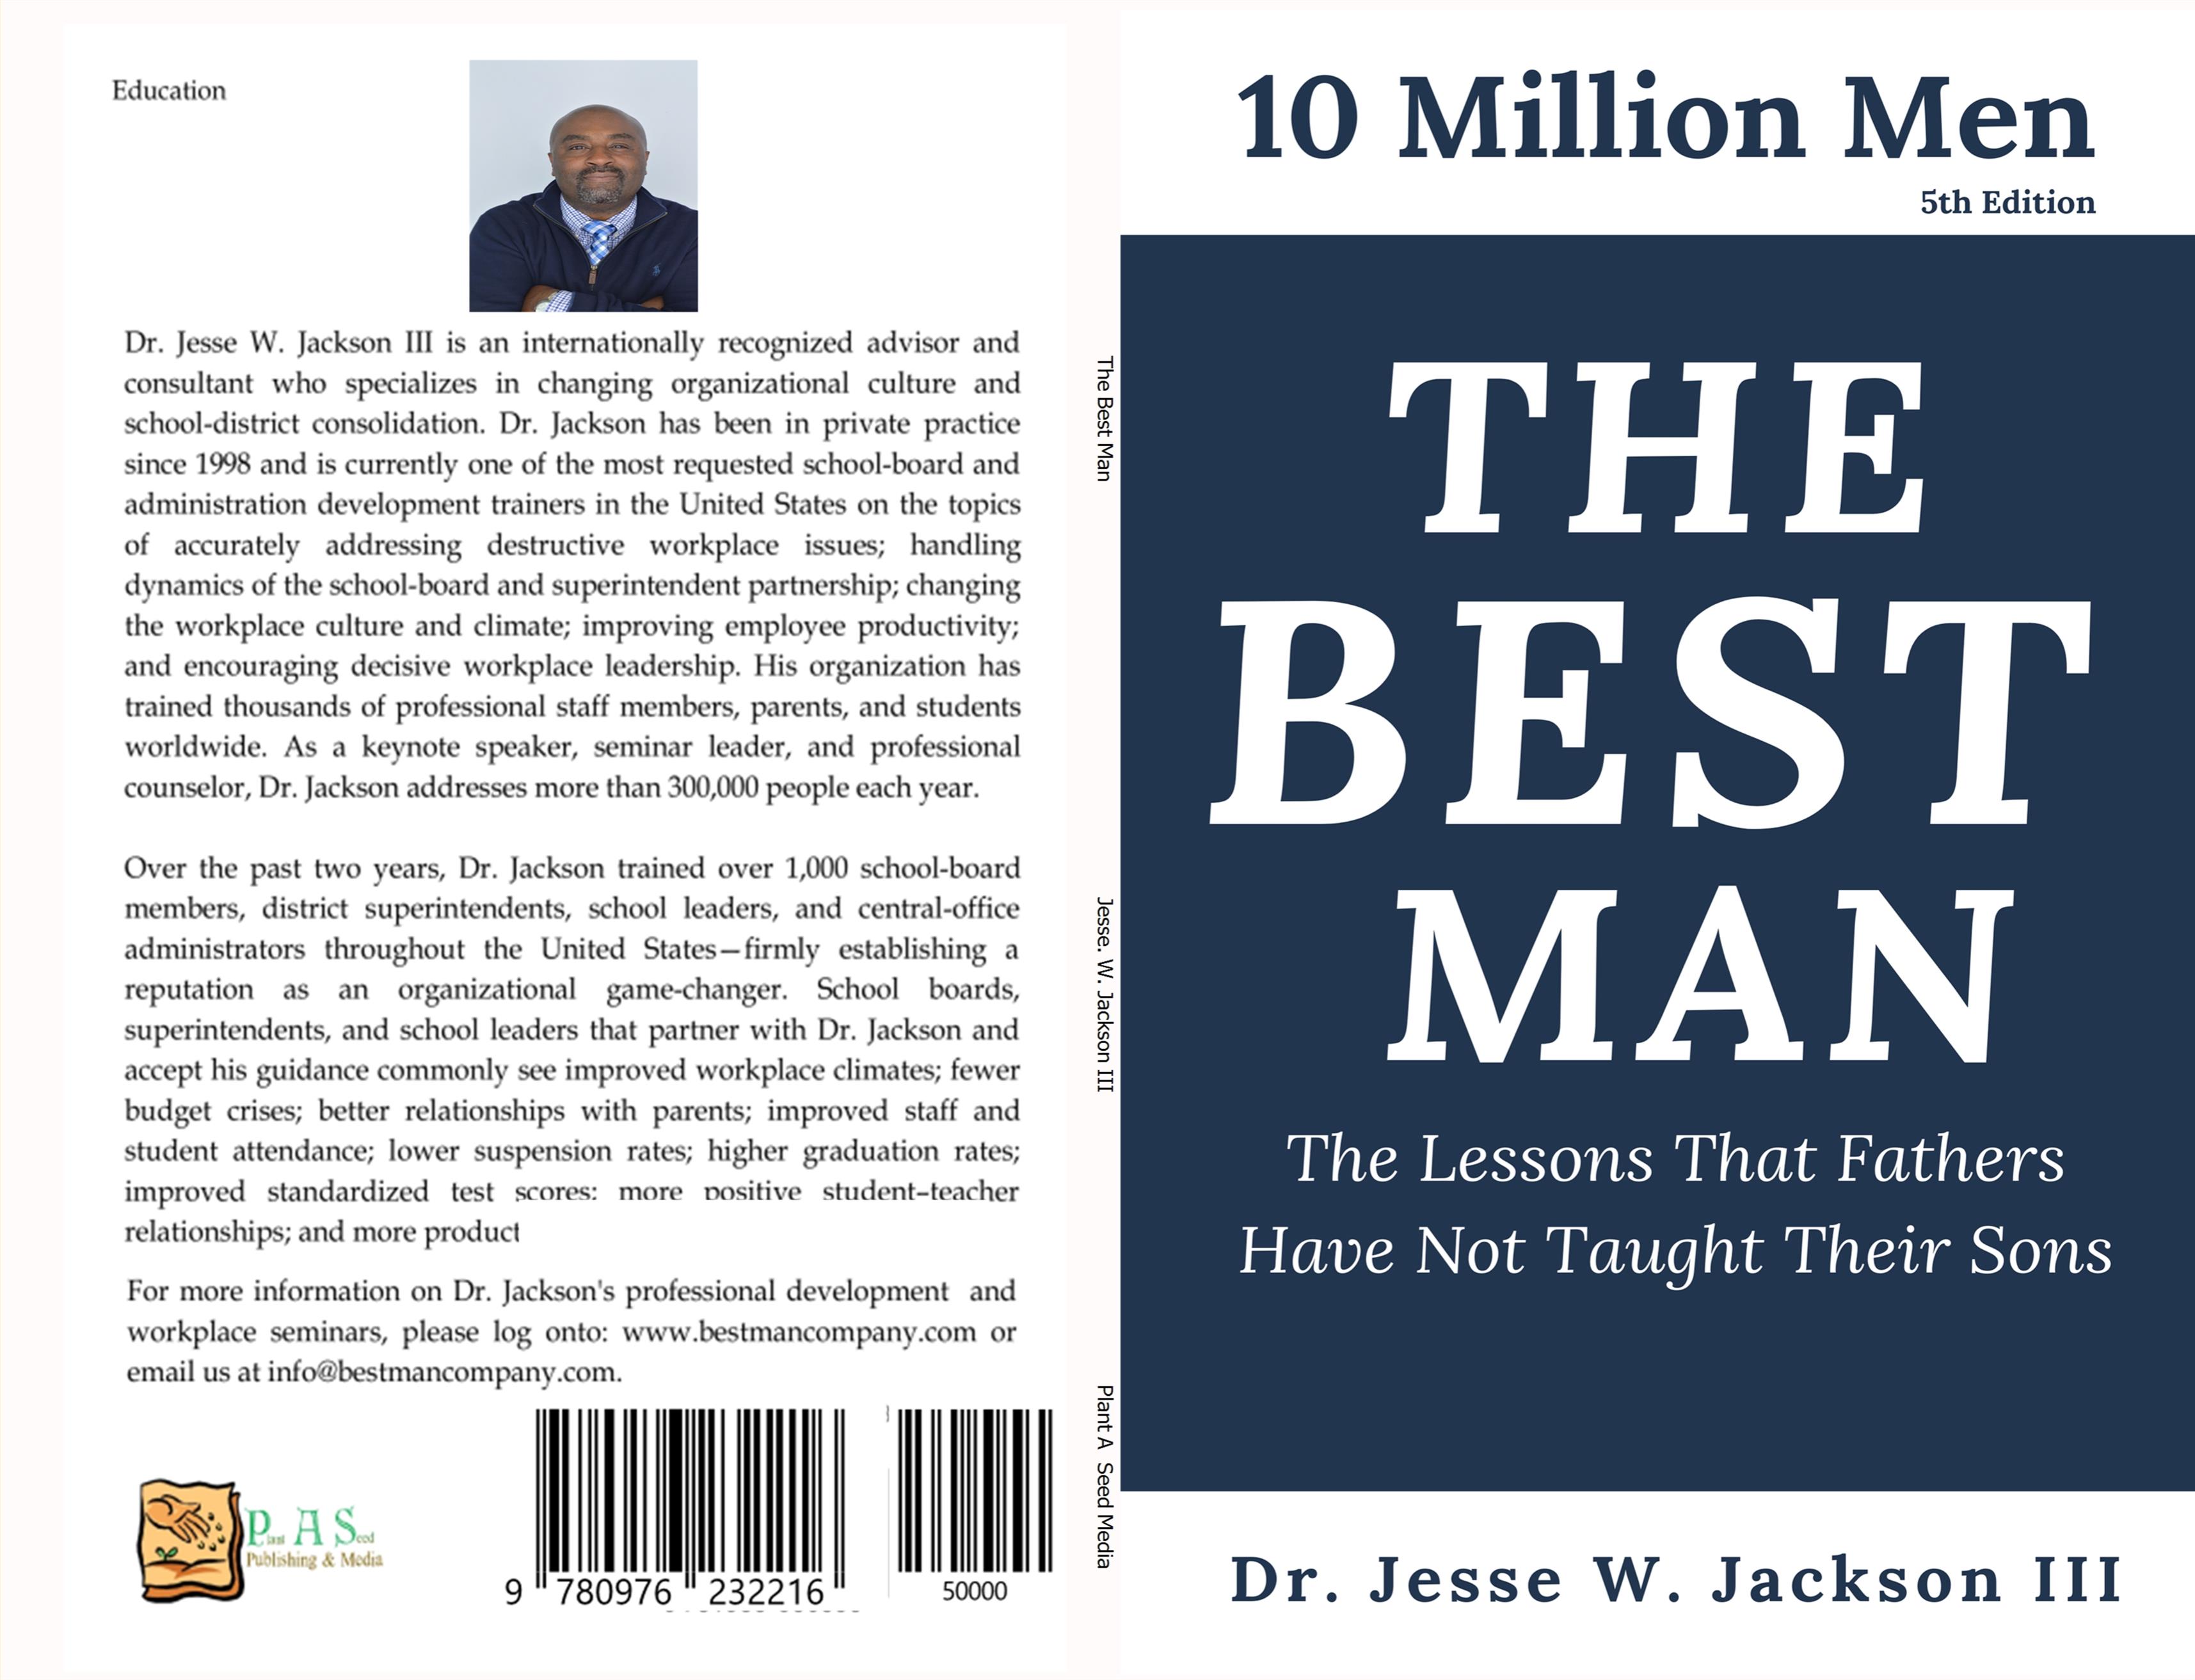 The Best Man: The Lessons That Fathers Have Not Taught Their Sons cover image